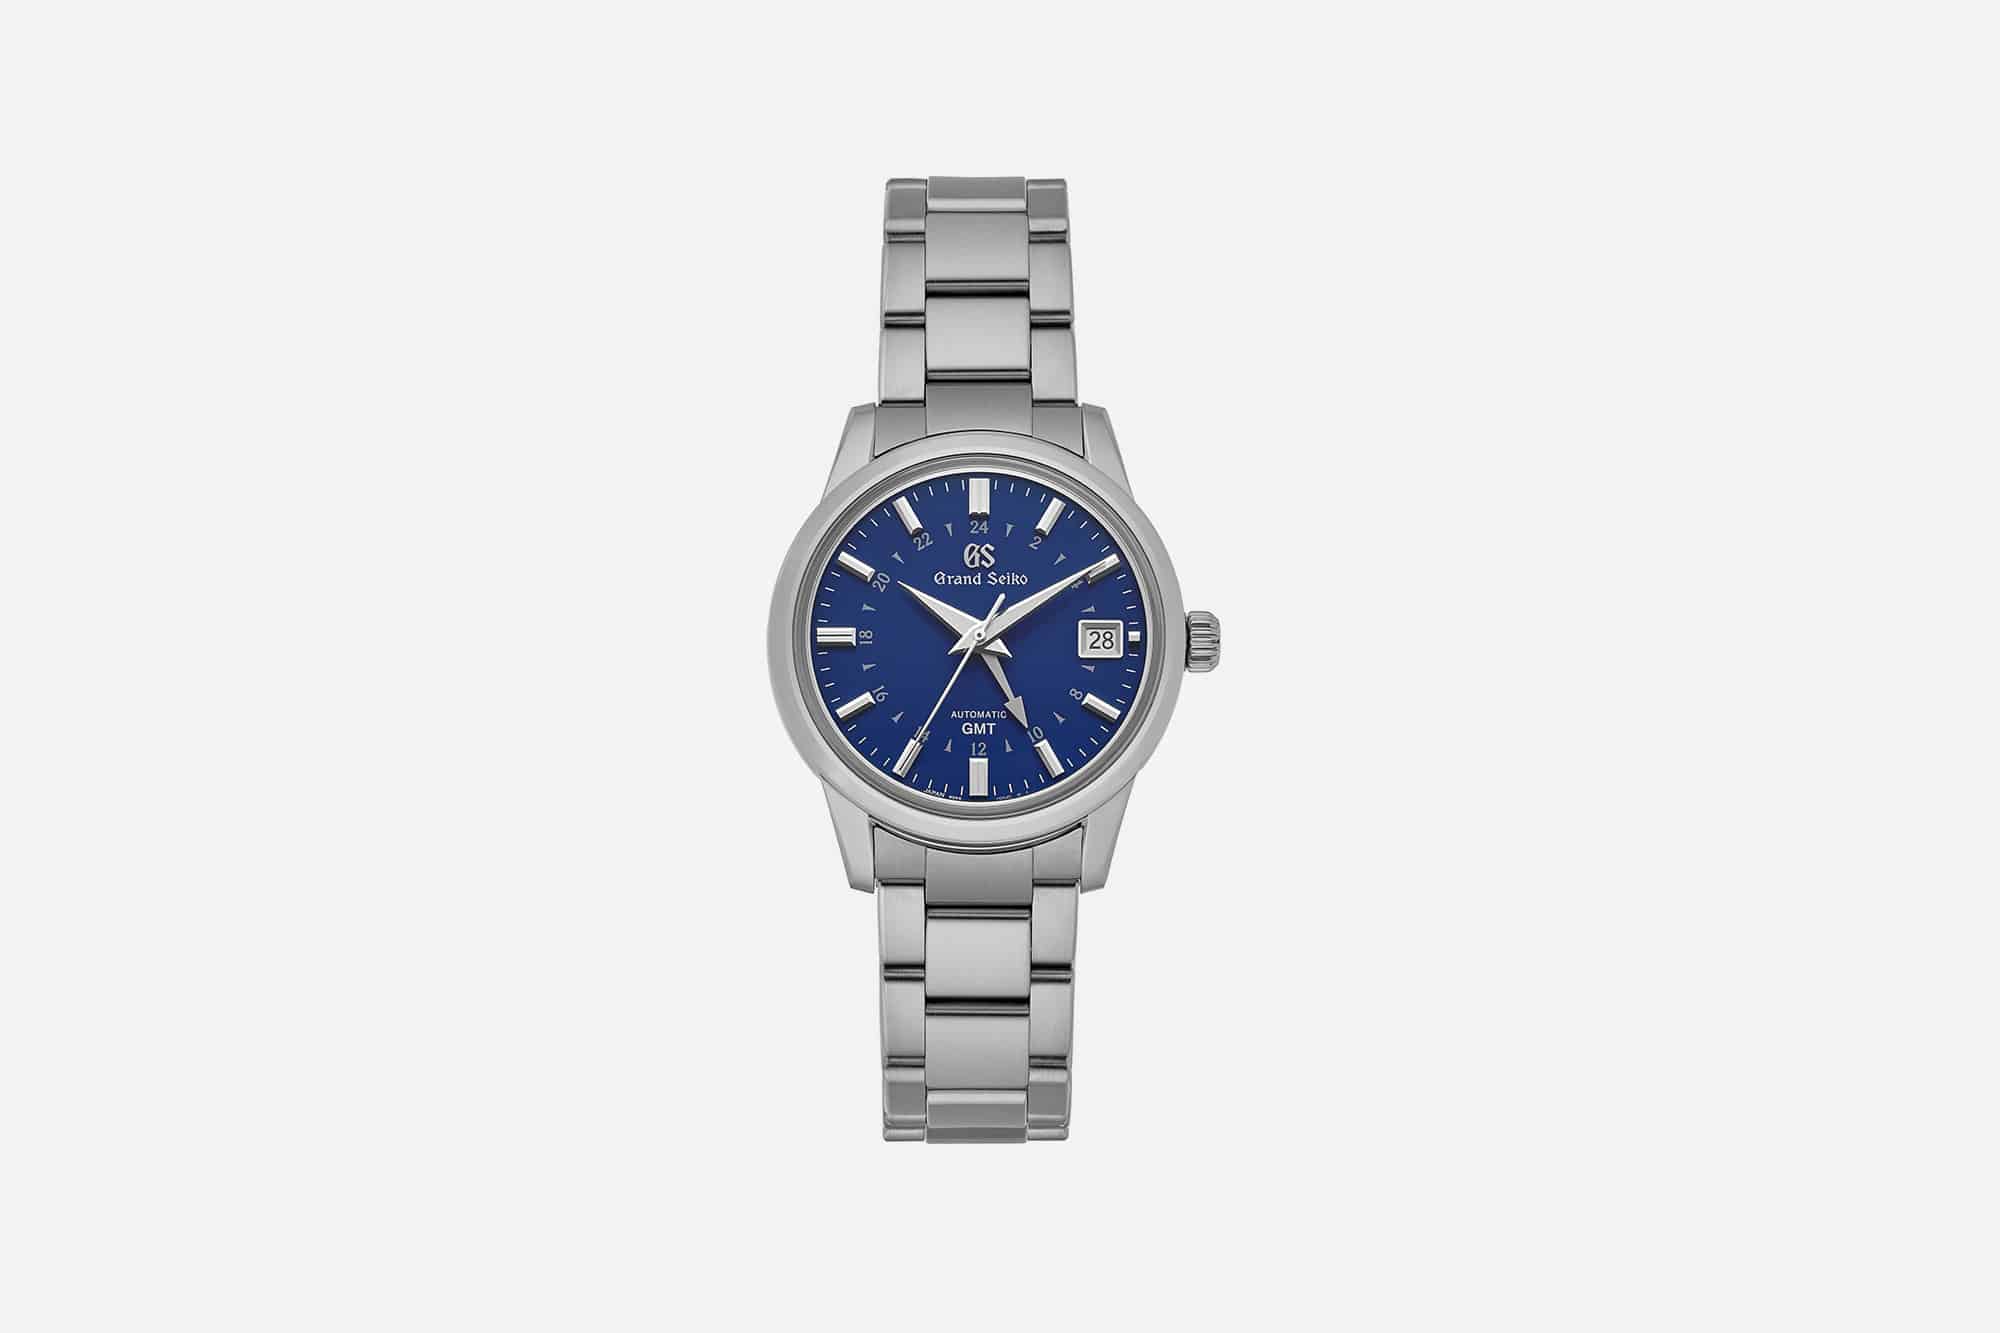 Hodinkee Teams Up With Grand Seiko for a New Take on a Favorite GMT